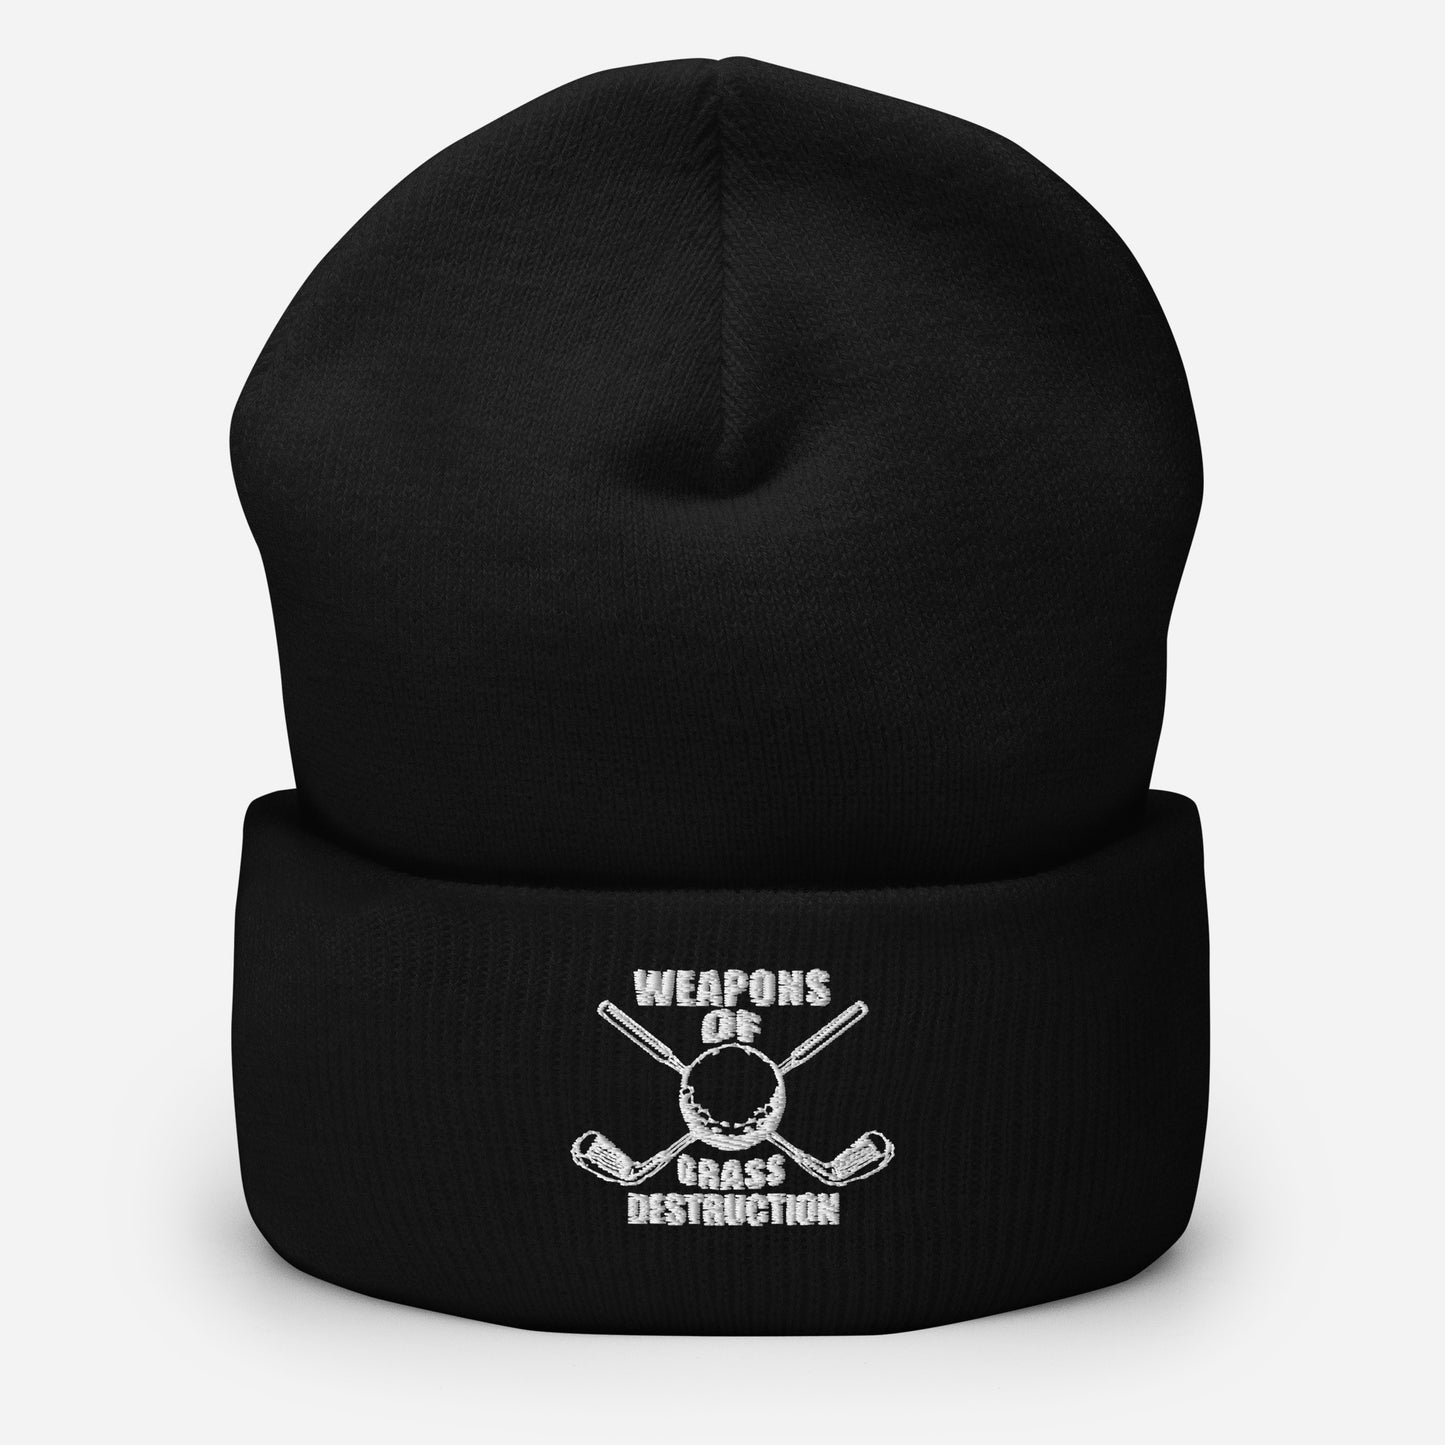 Weapons of Grass Destruction Beanie (White Lettering)